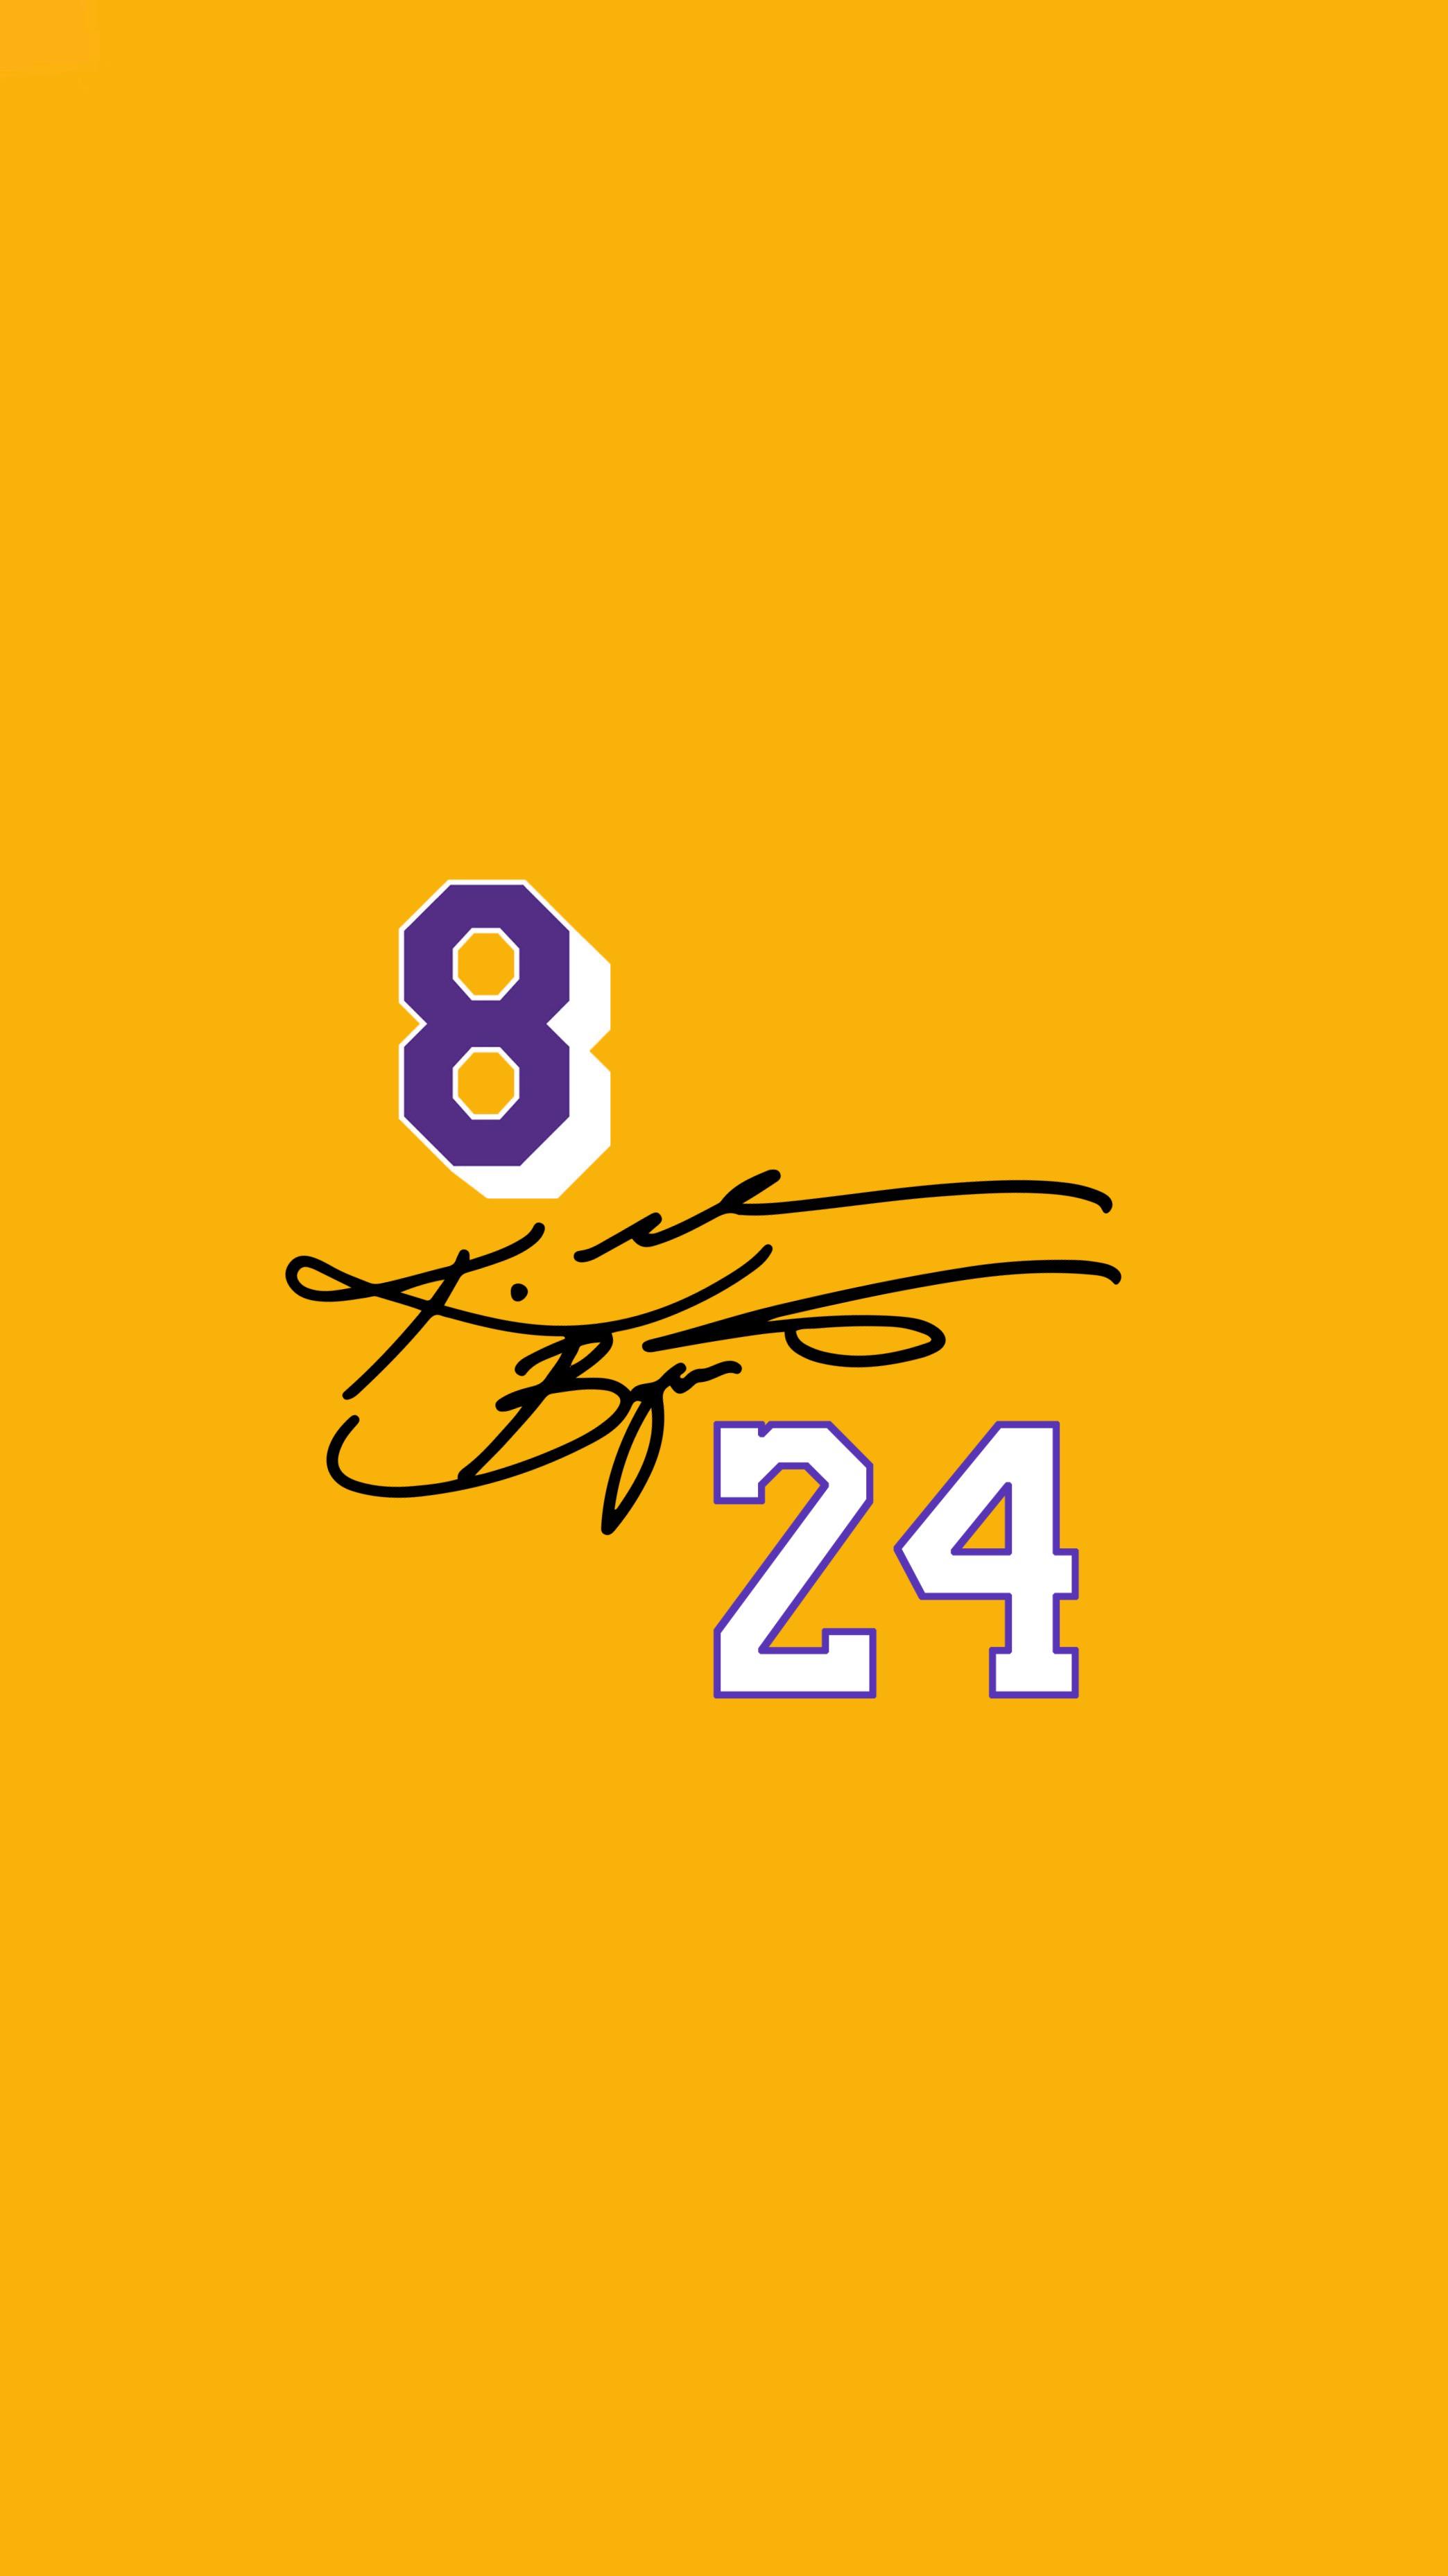 Posting a few simple Kobe iPhone (mobile) wallpaper I made: lakers